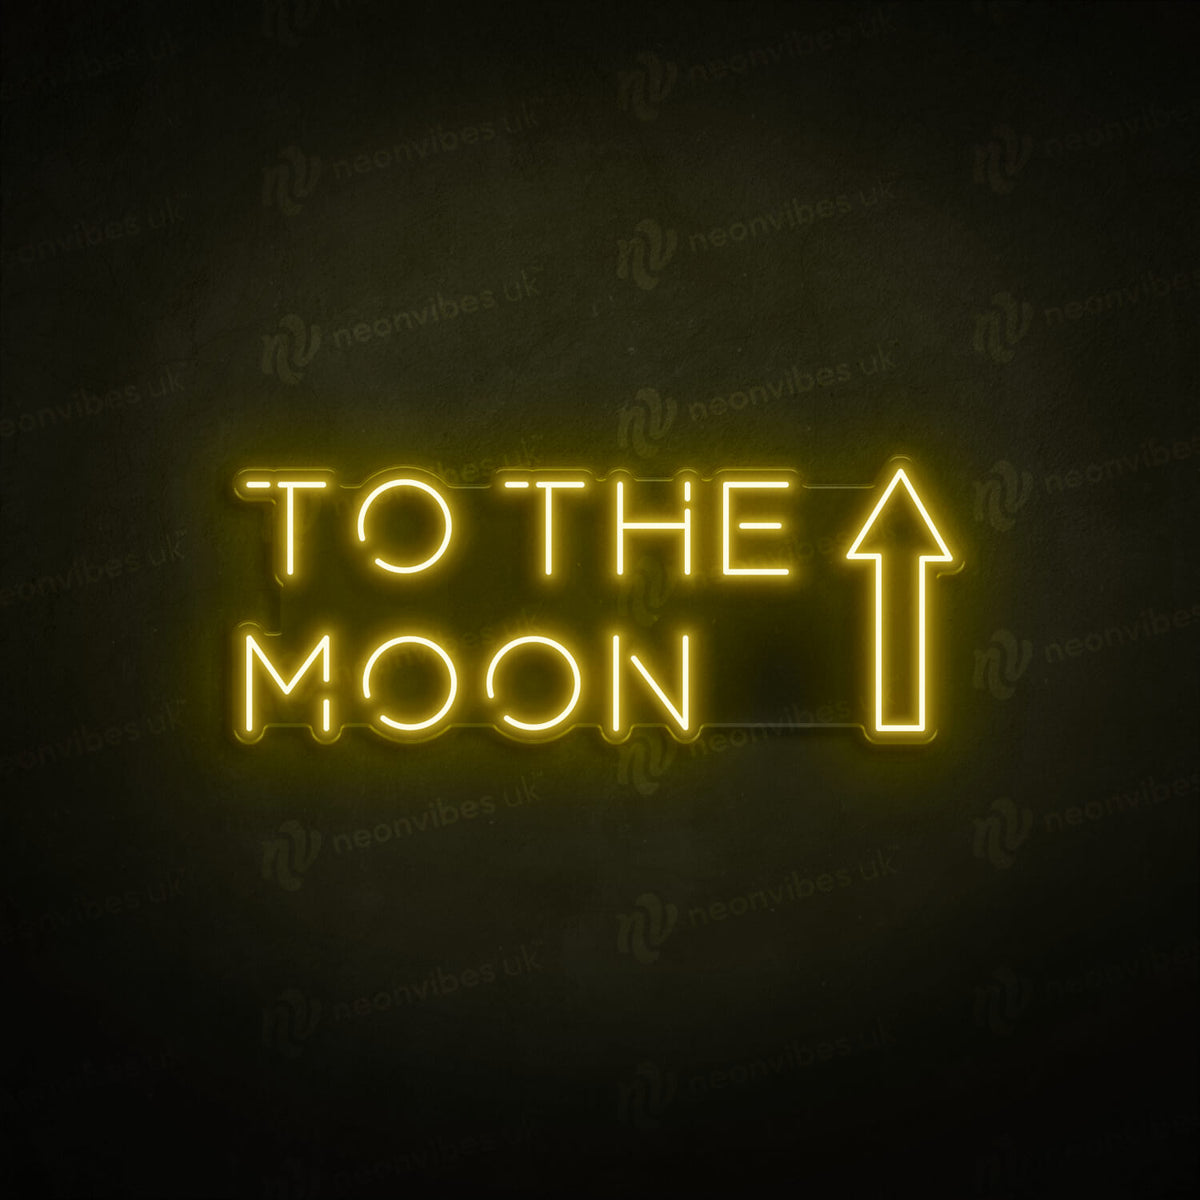 To the moon neon sign